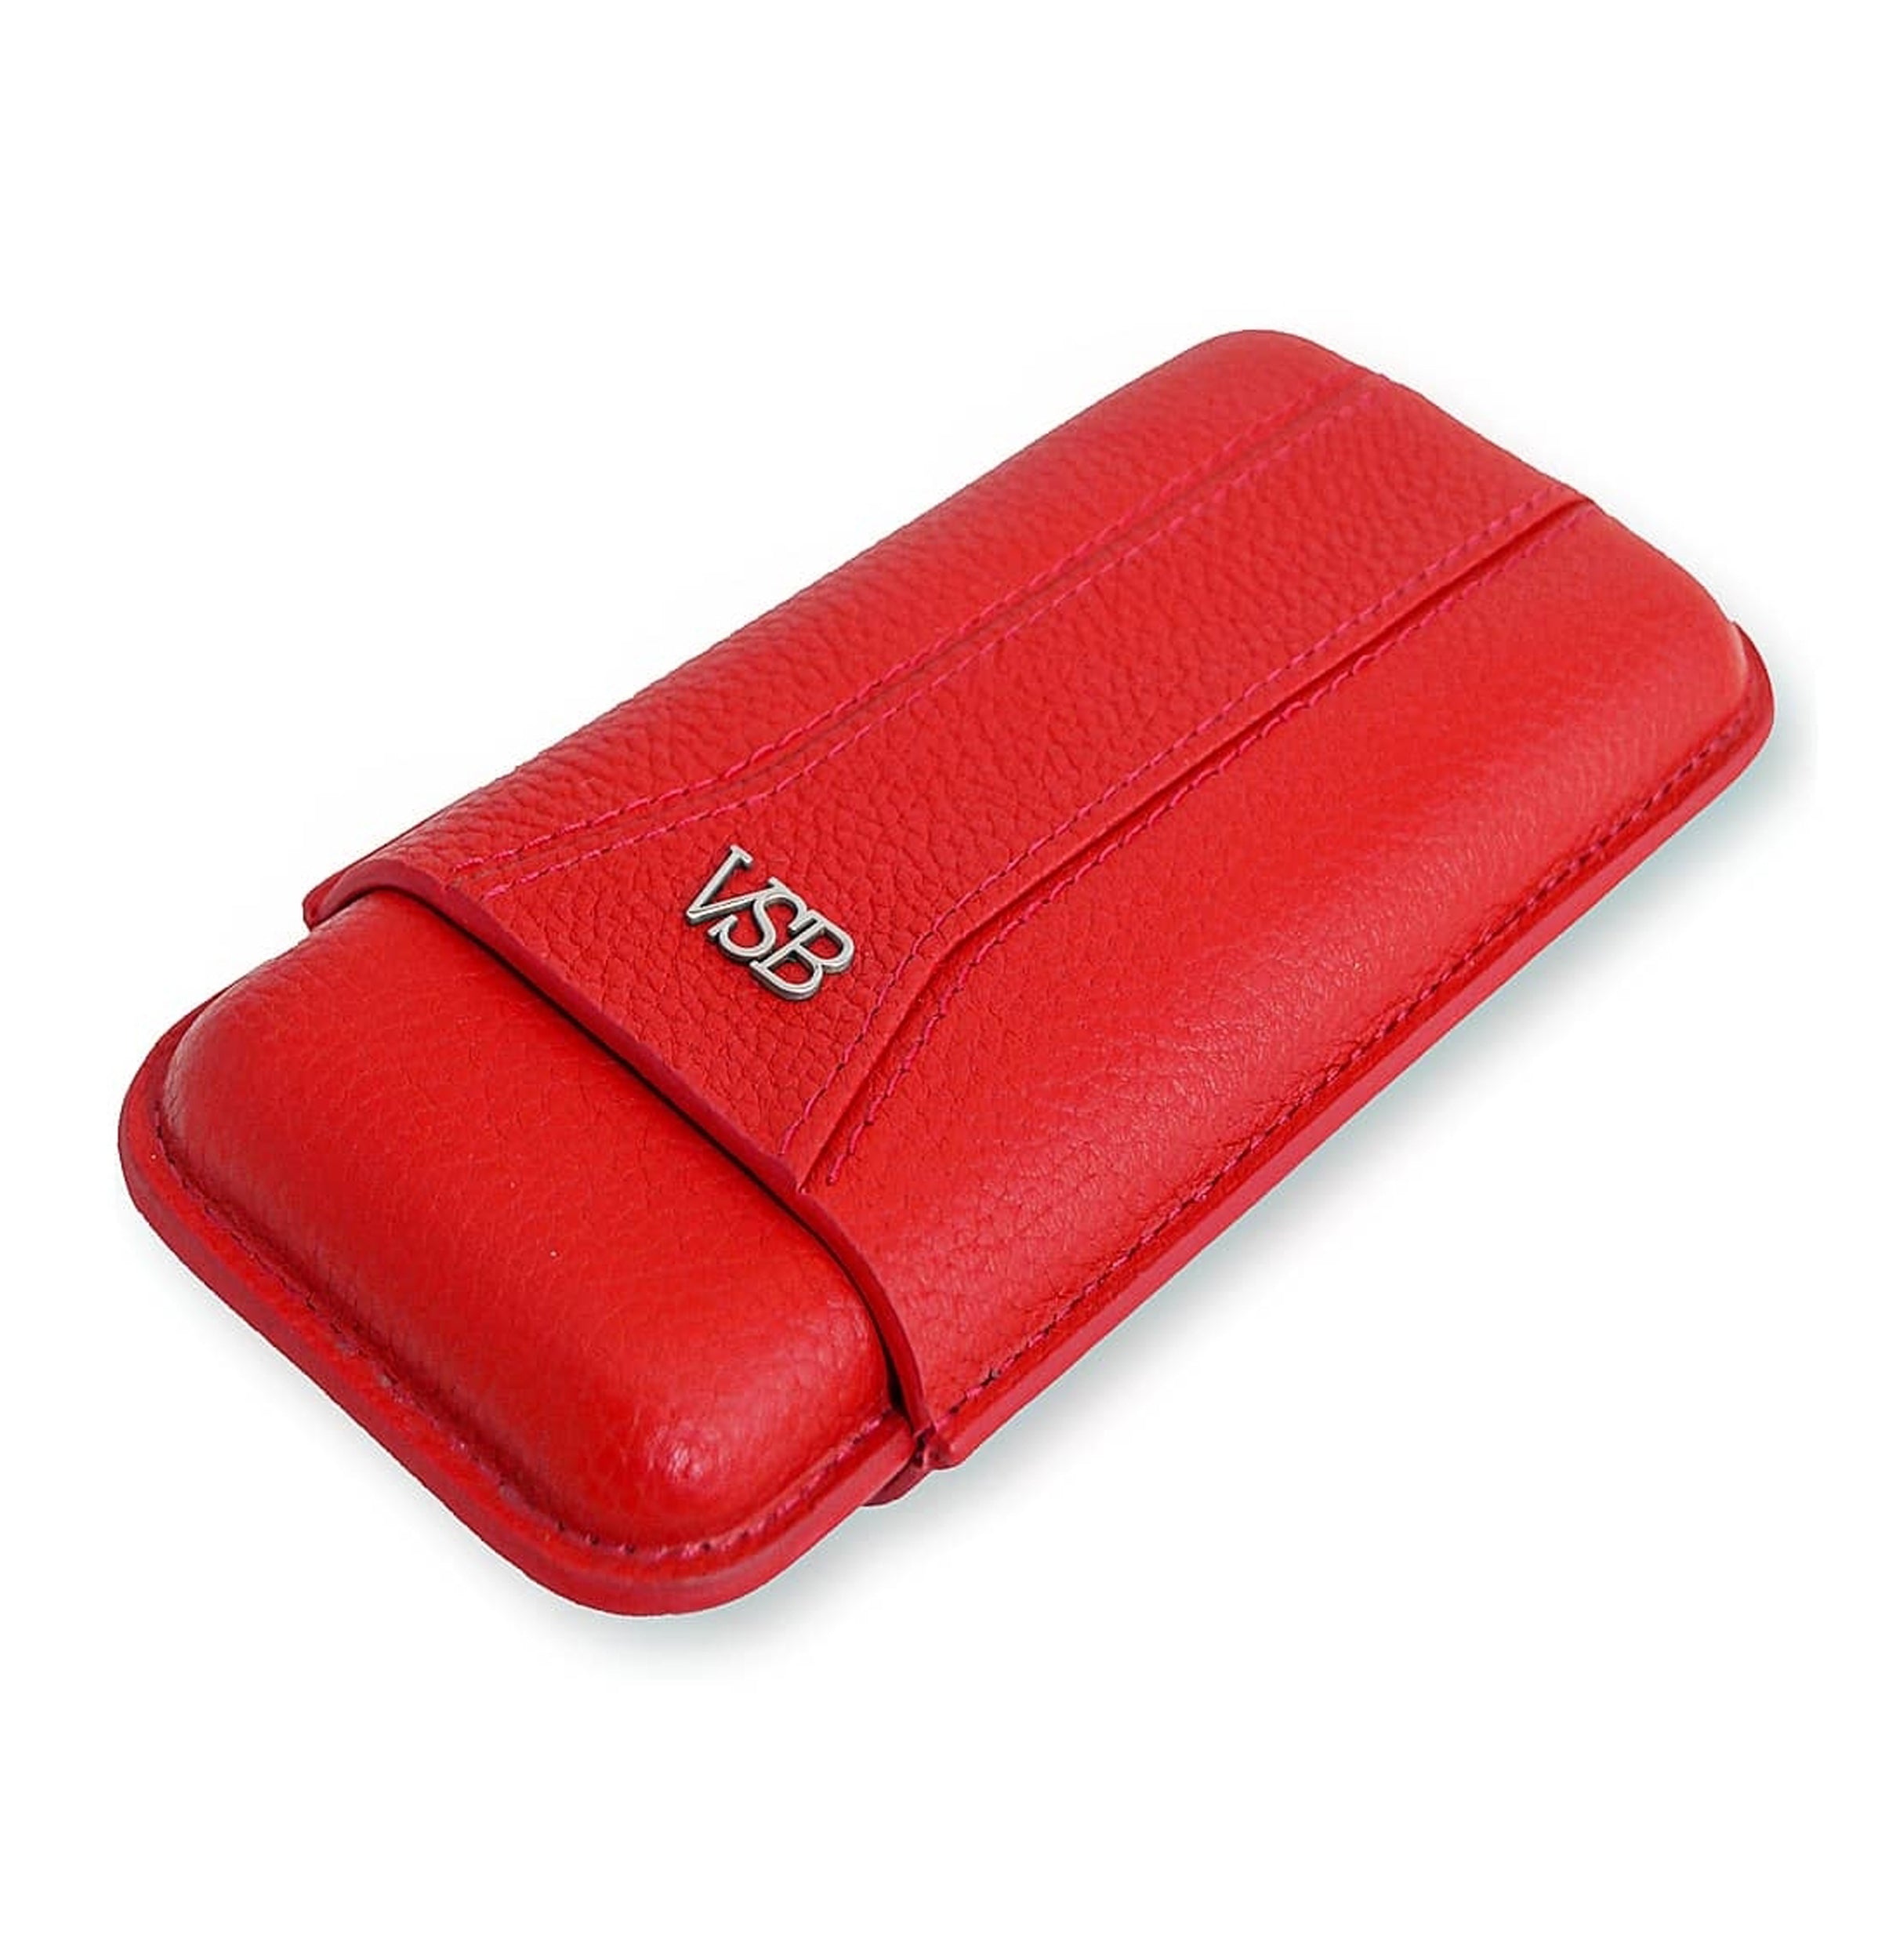 Three Finger Red Leather Cigar Pouch